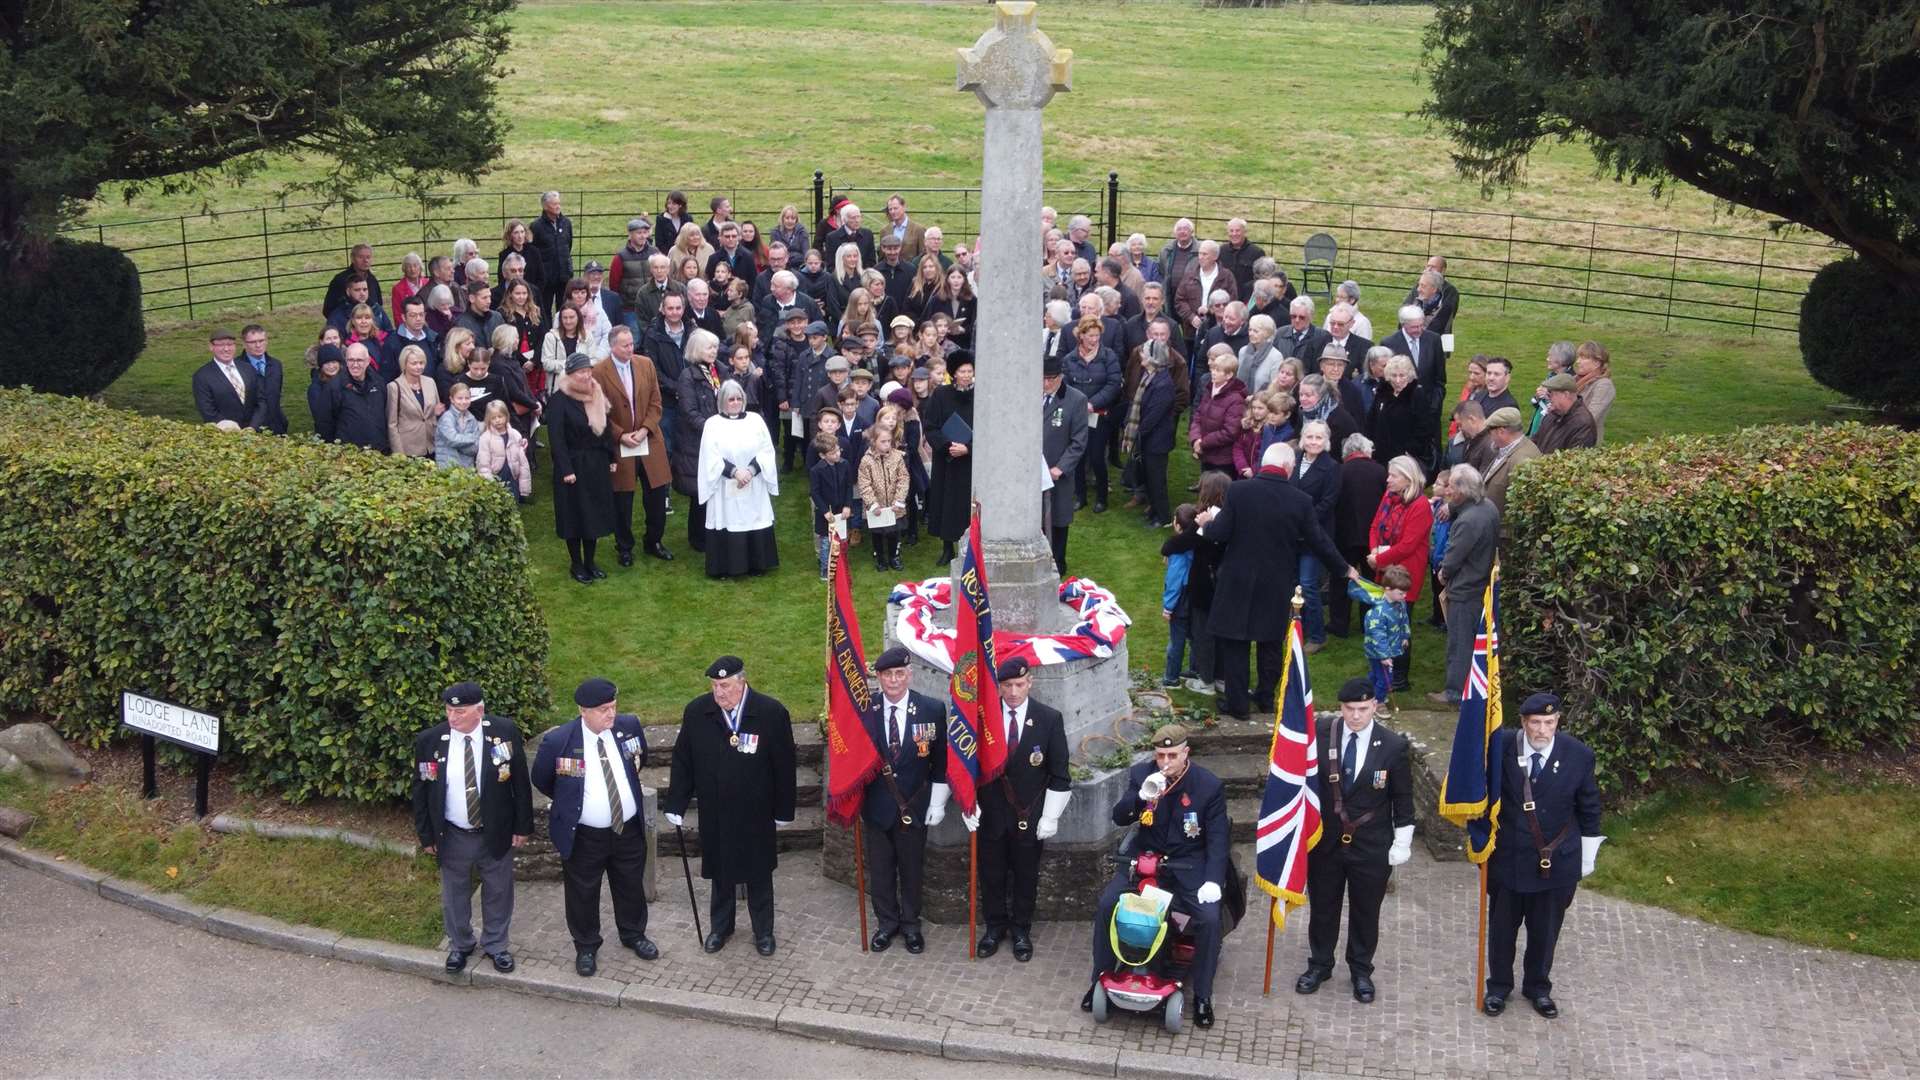 The service commemorated 100 years of Cobham war memorial. Picture: Jason Arthur